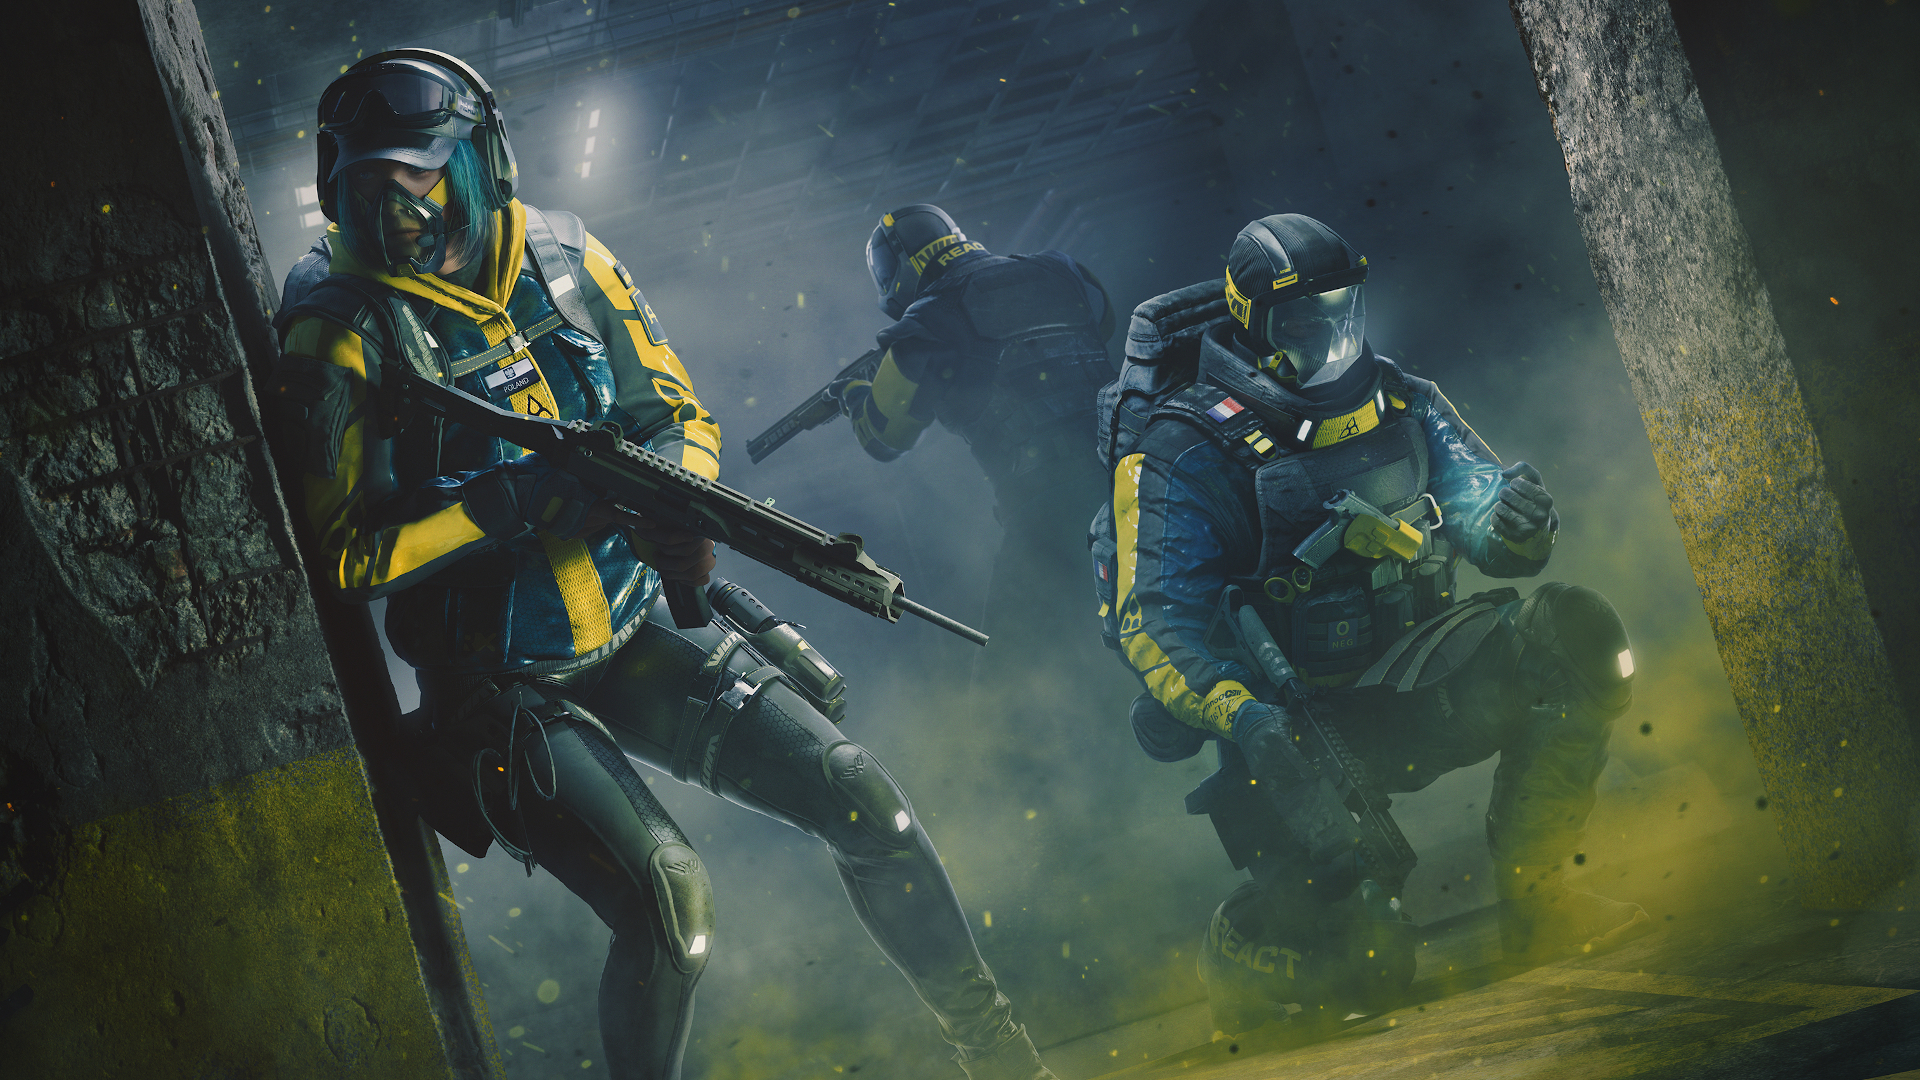  Looks like Rainbow Six Extraction will be out January 20 